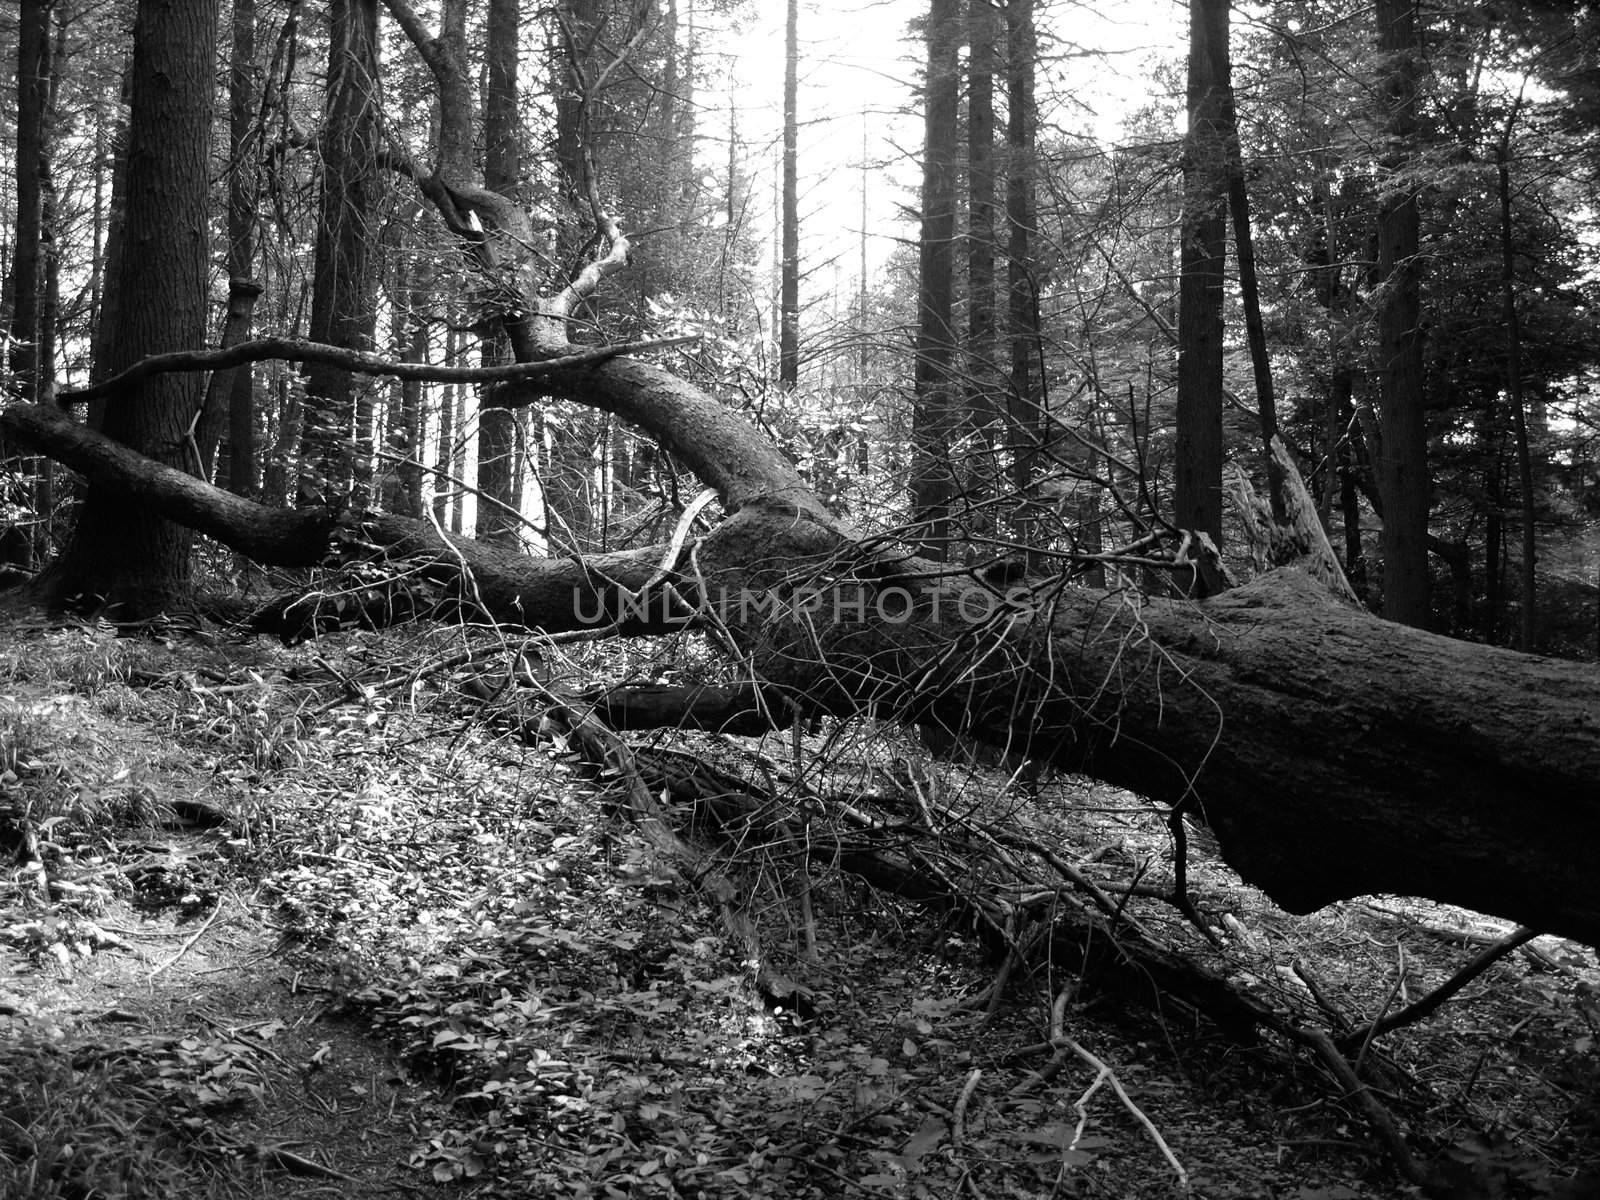 Fallen tree shown in black and white